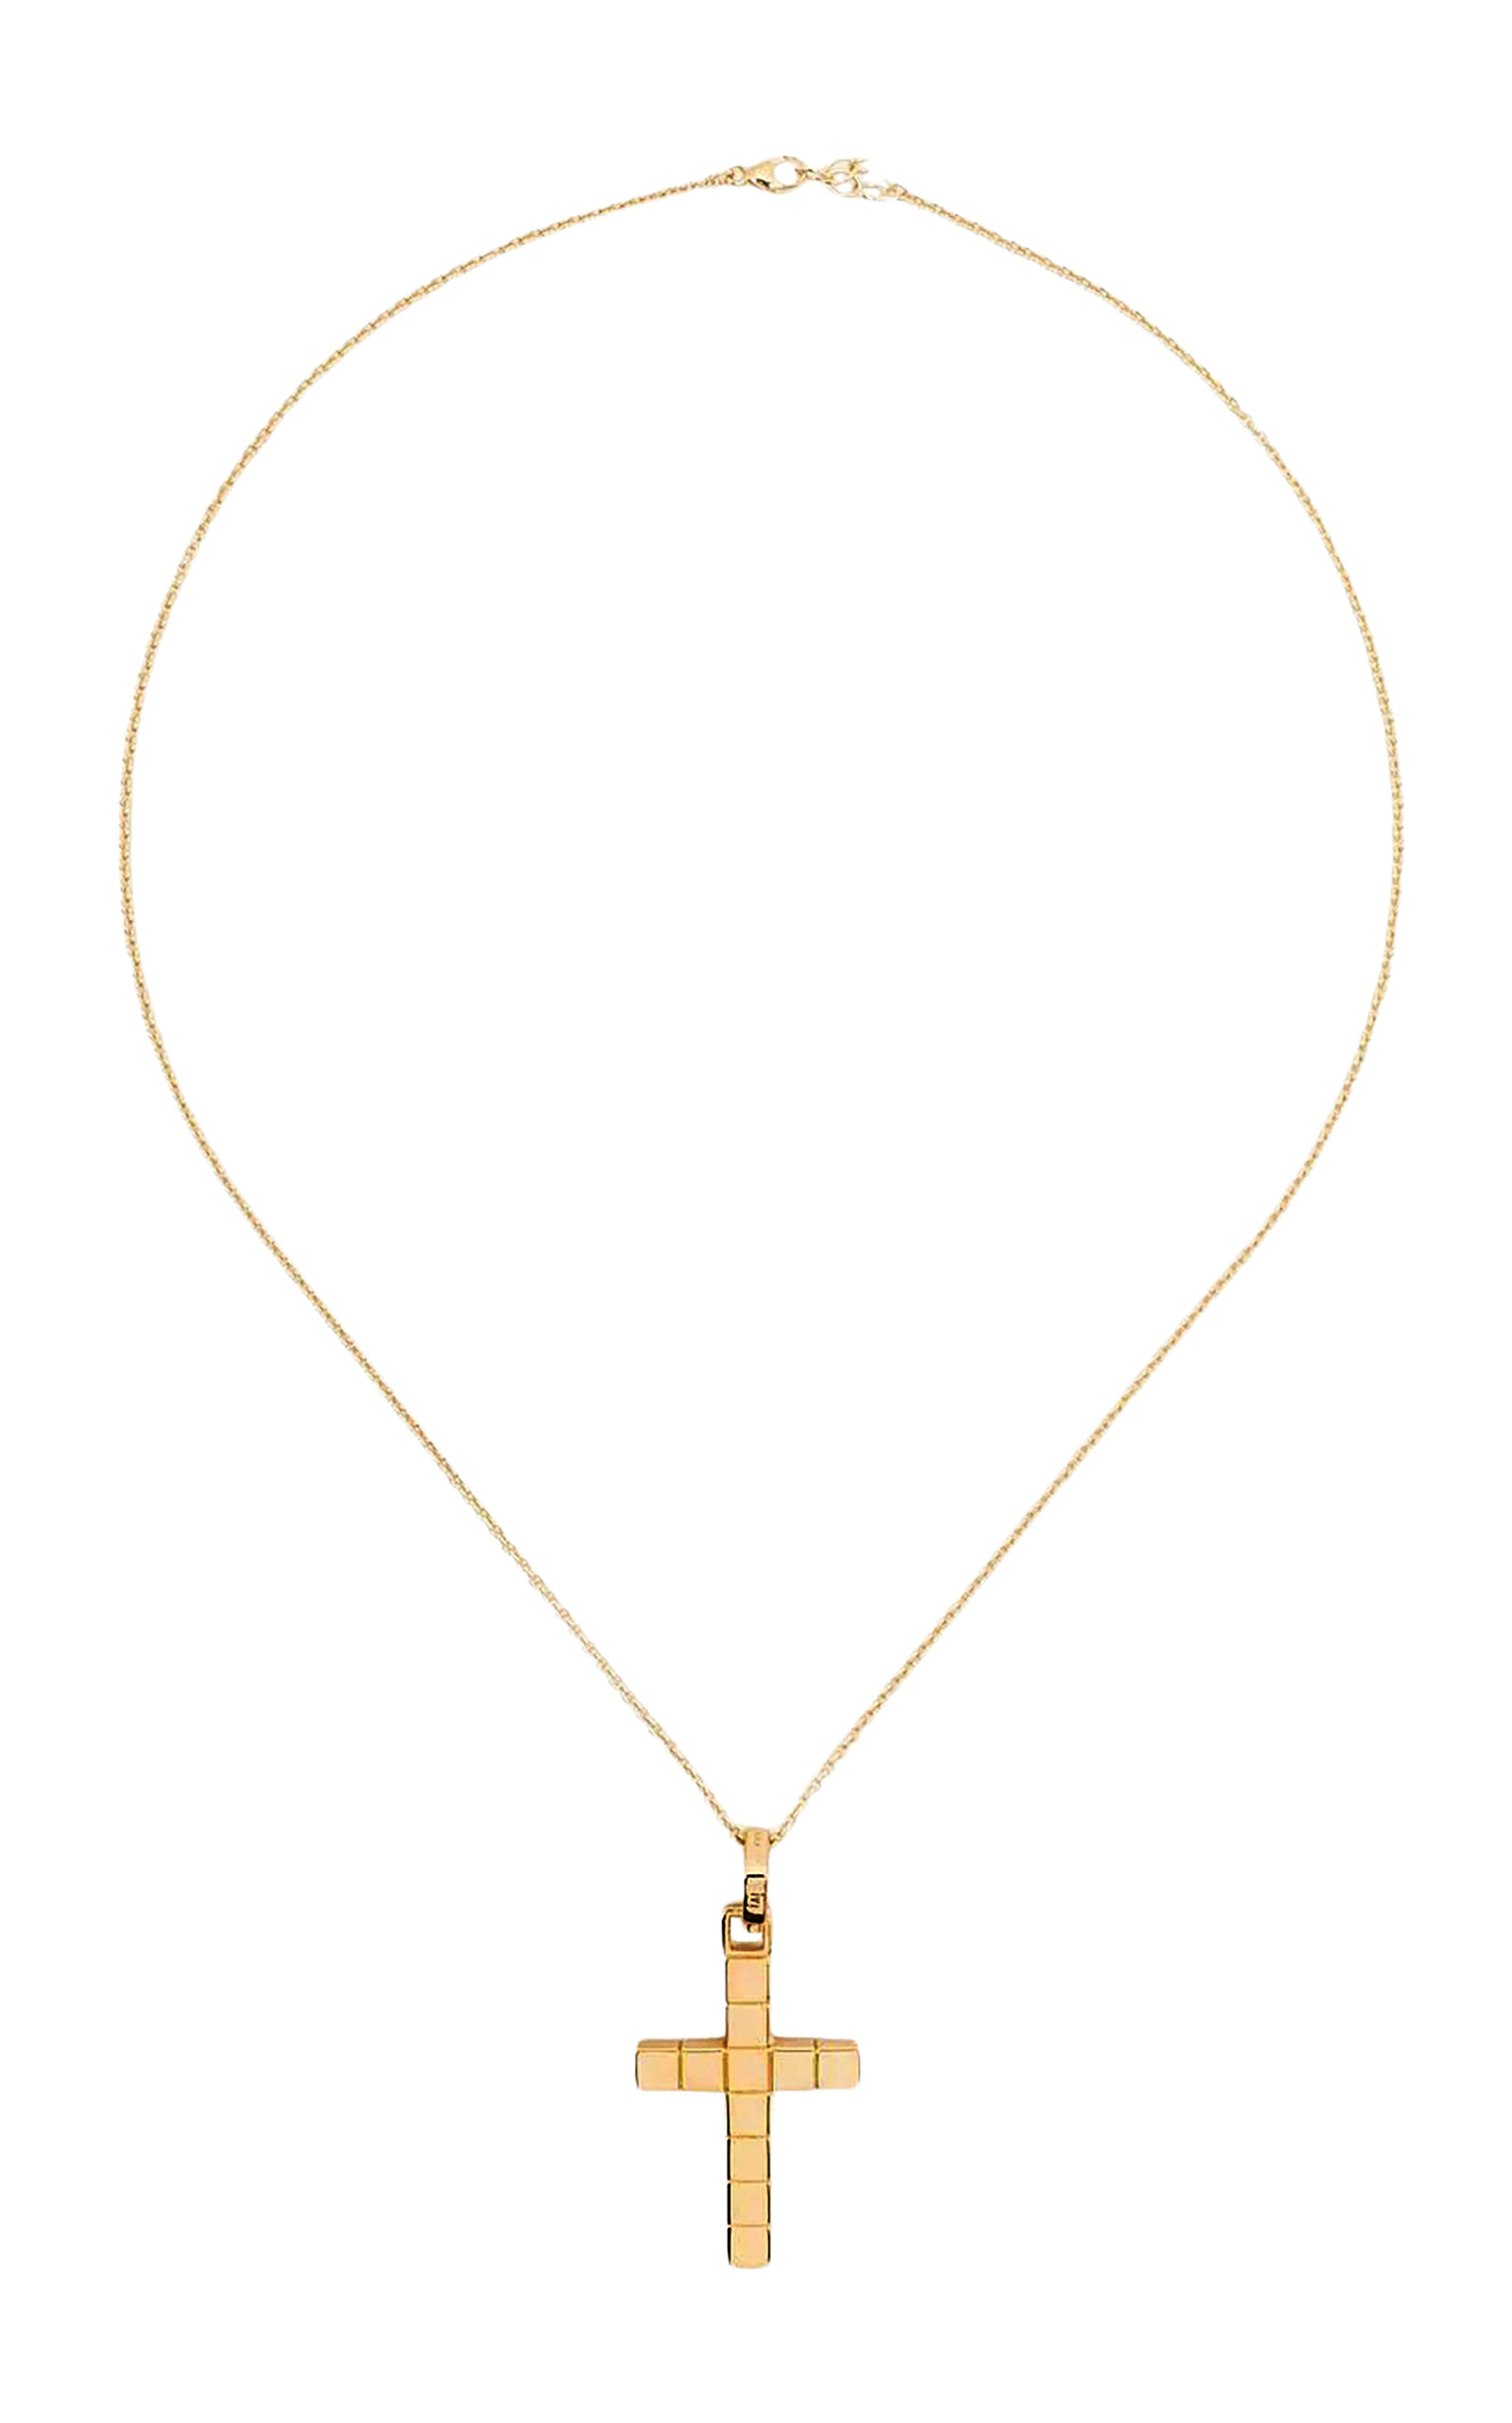 IVI Women's Signore Cross 18k Gold-Plated Necklace